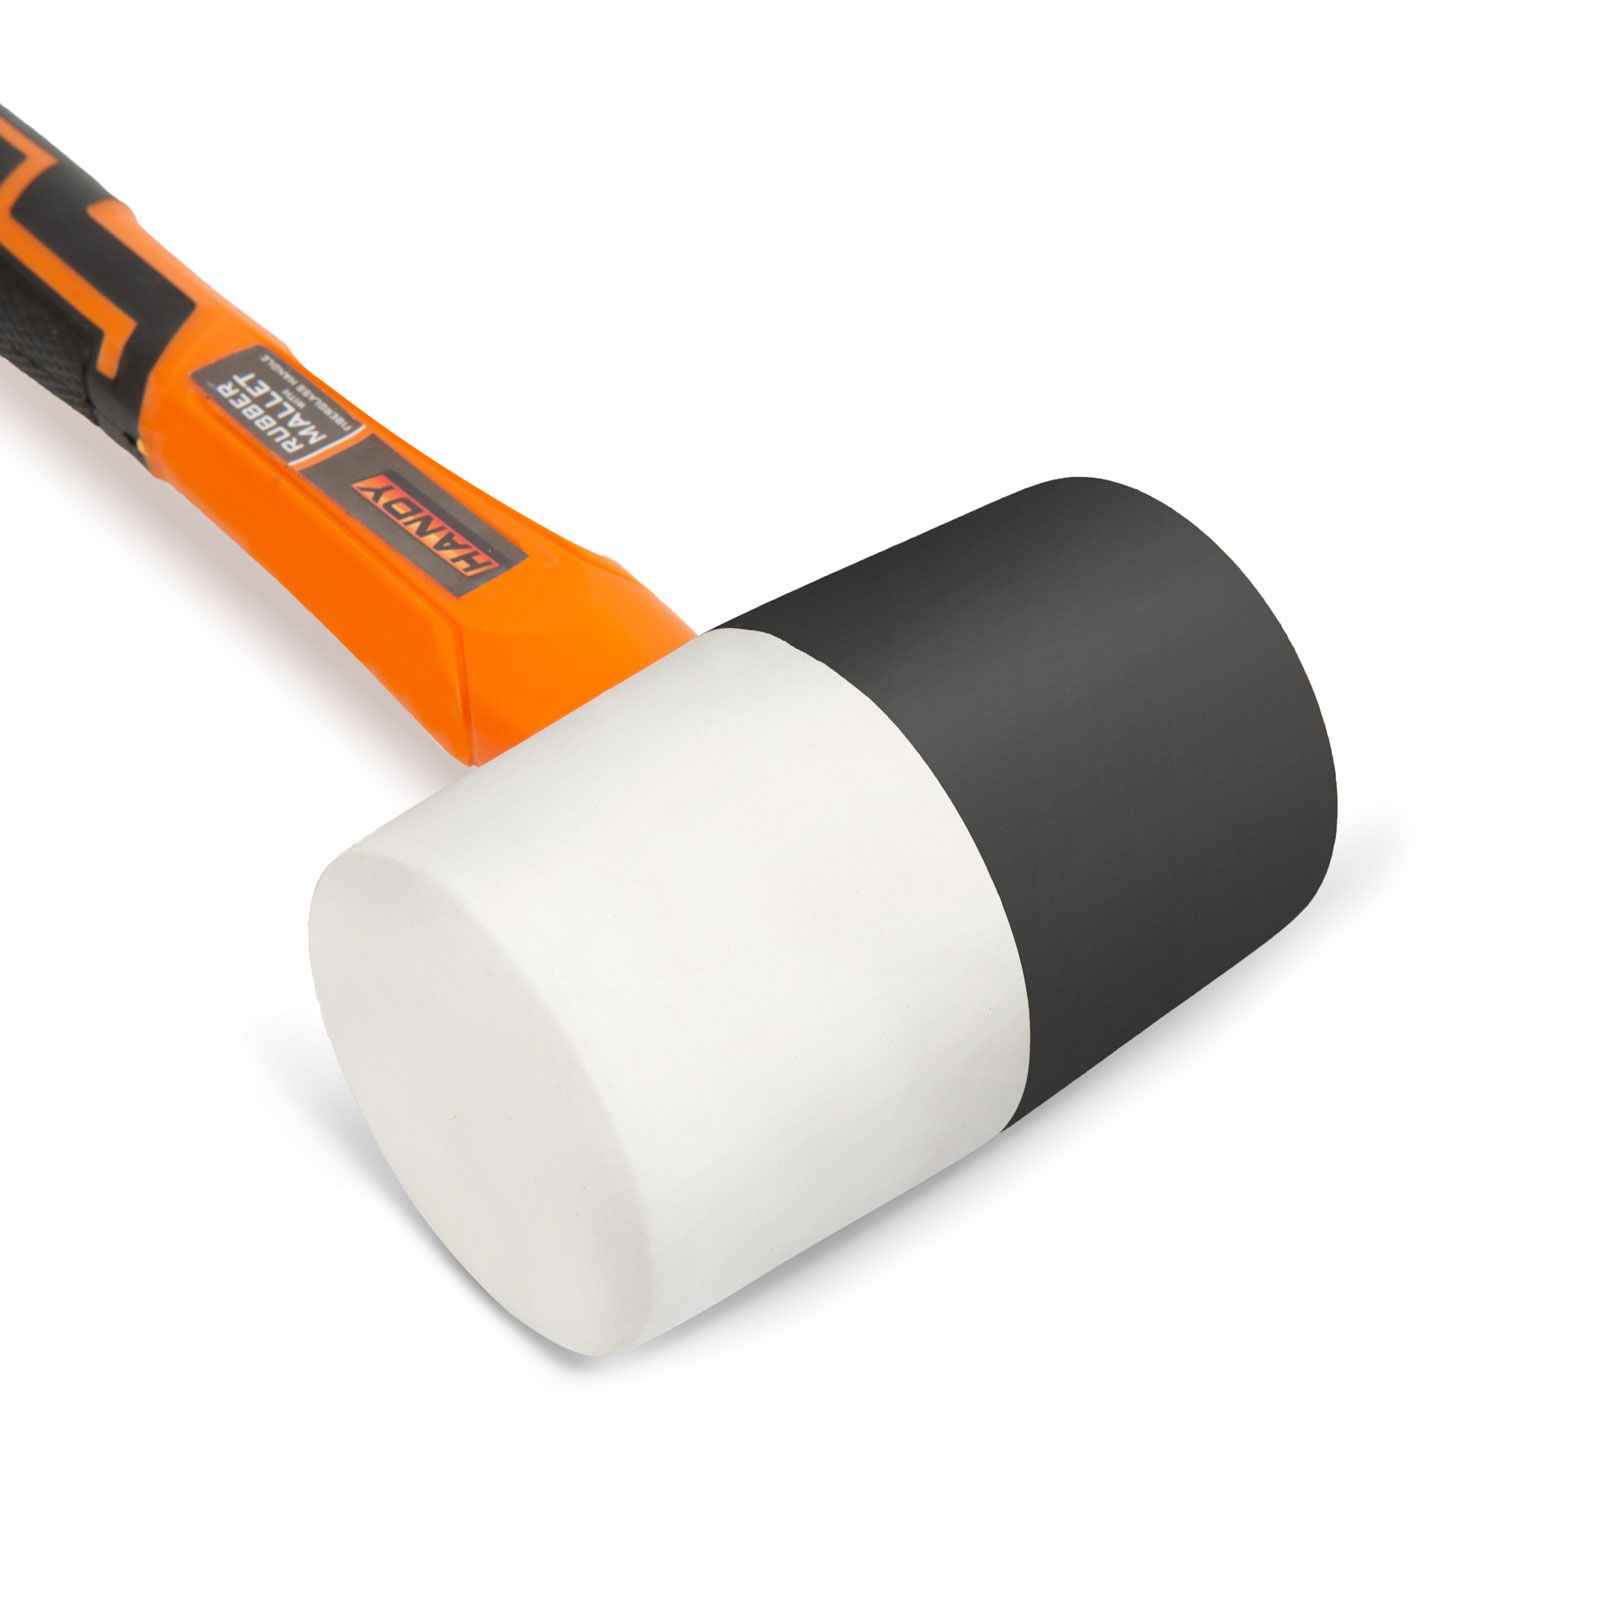 Rubber mallet with fiberglass handle - 680 g thumb